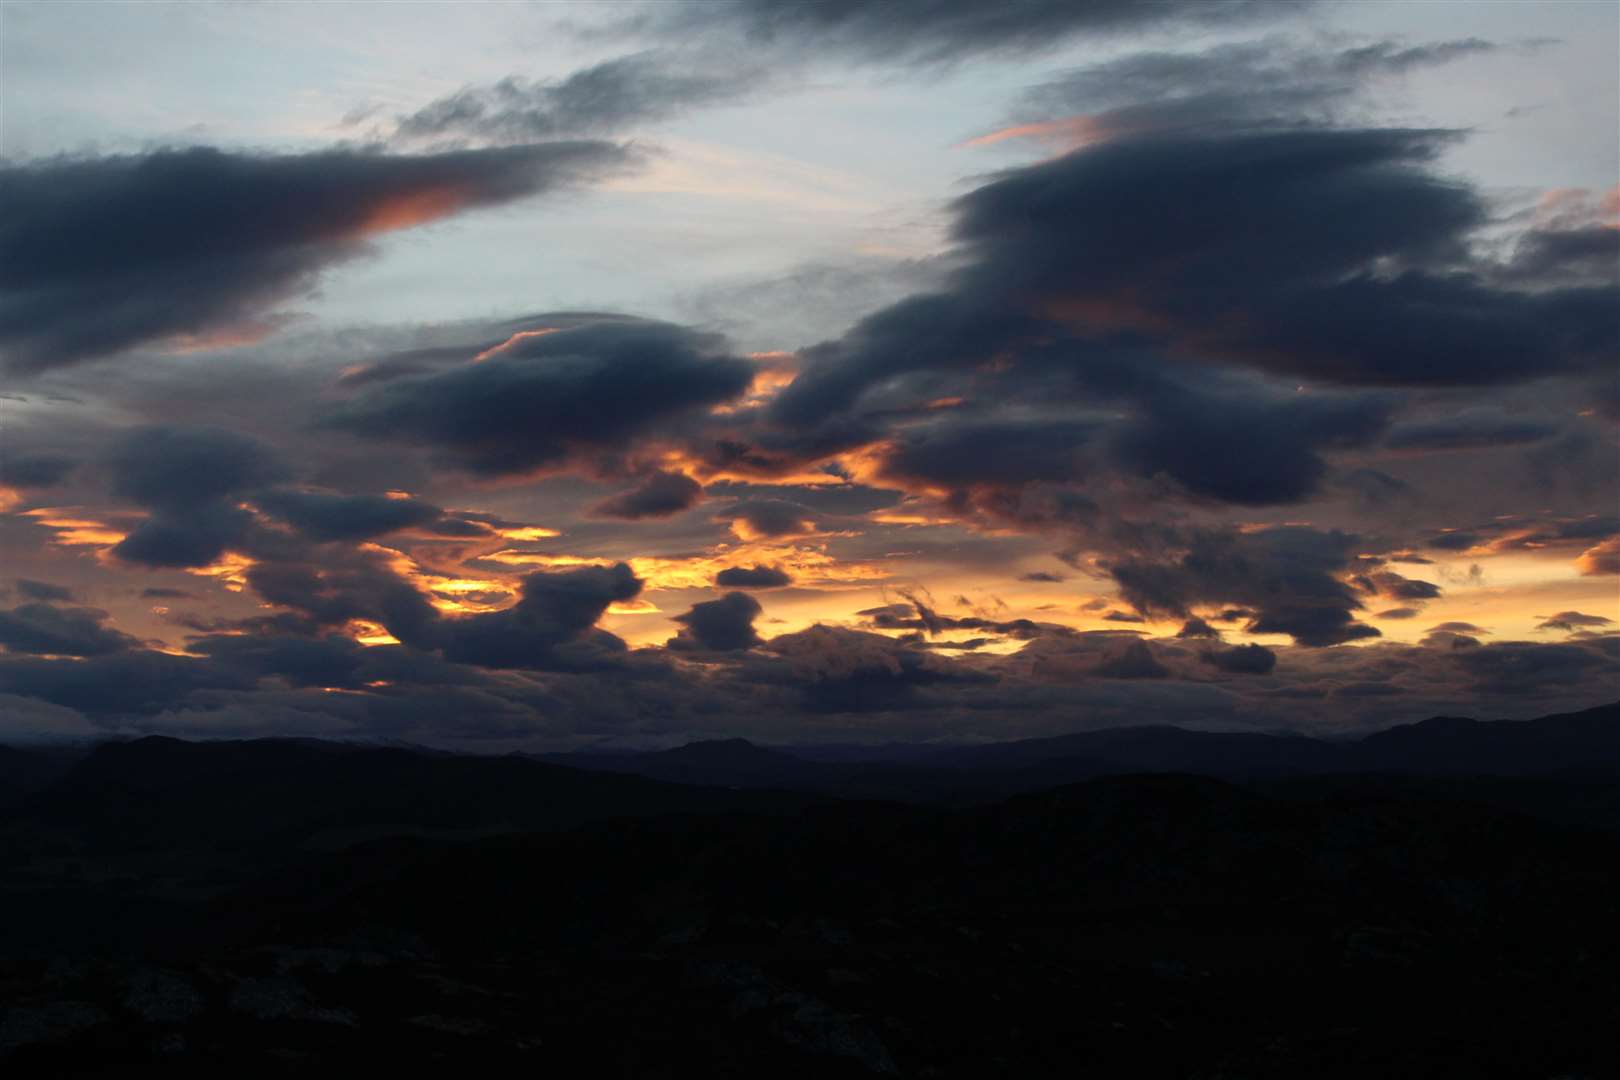 A dramatic sky at sunset from Stac Gorm.